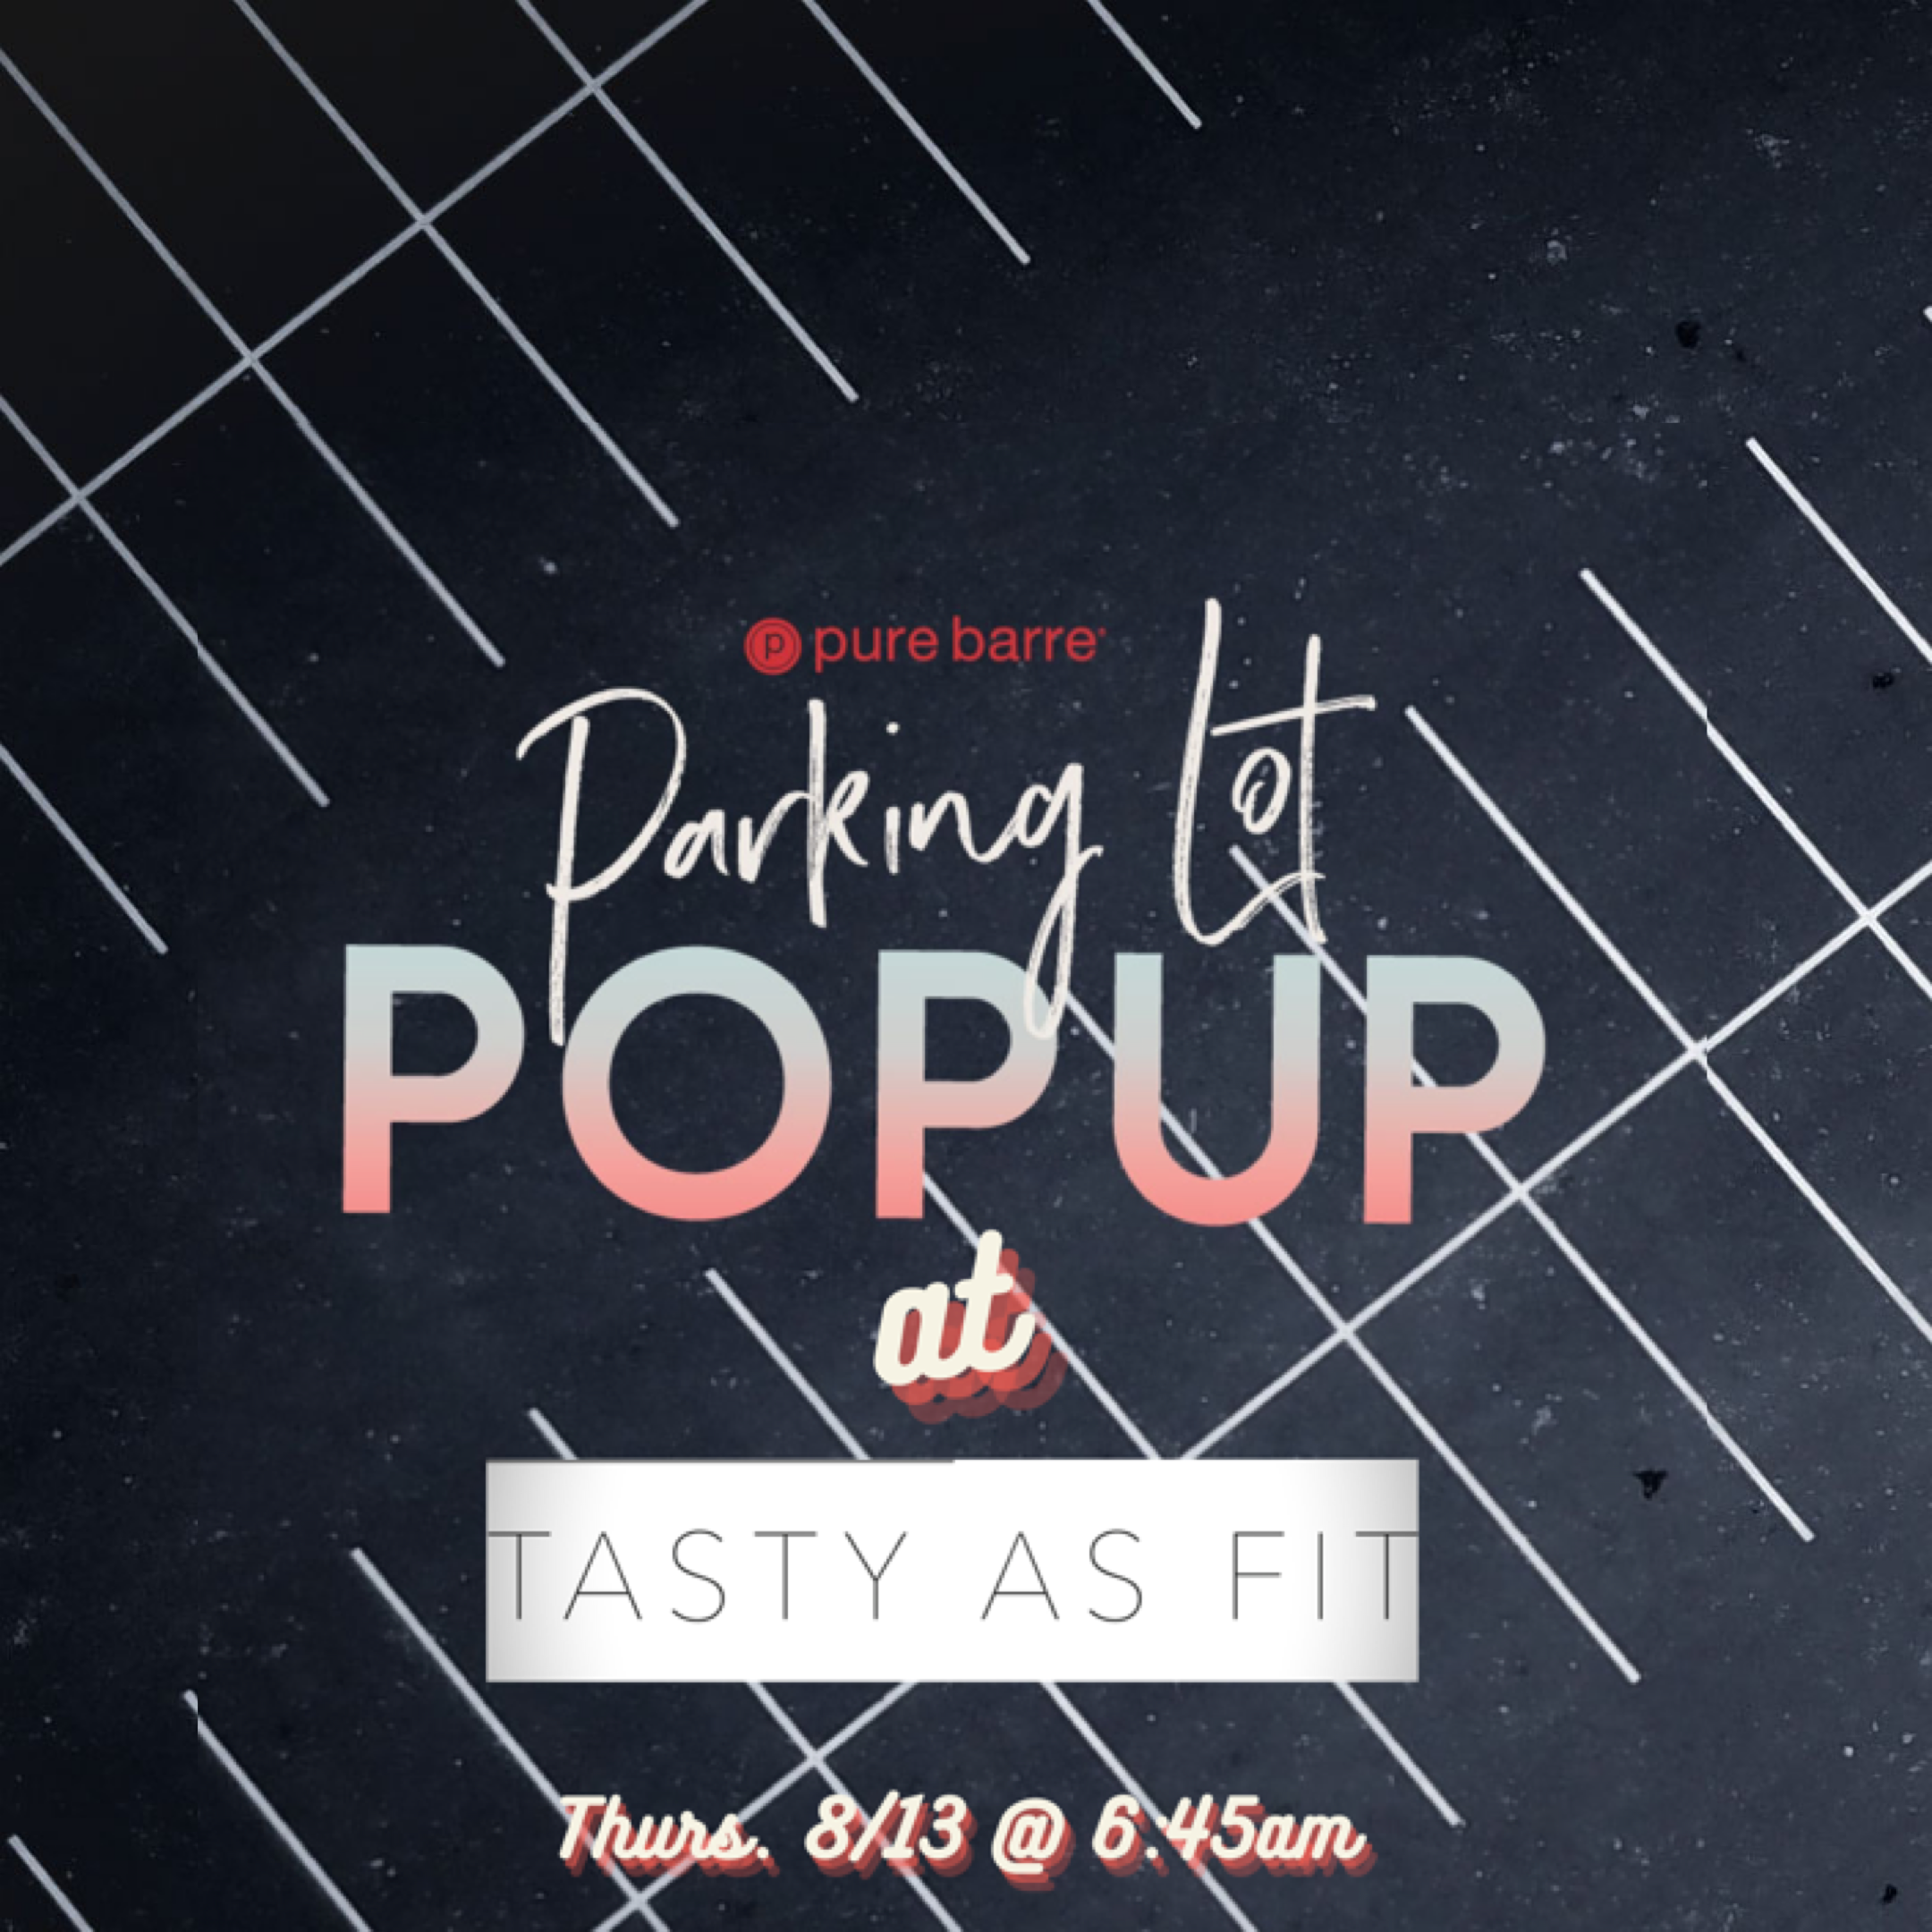 TASTY AS FIT x PURE BARRE POP UP